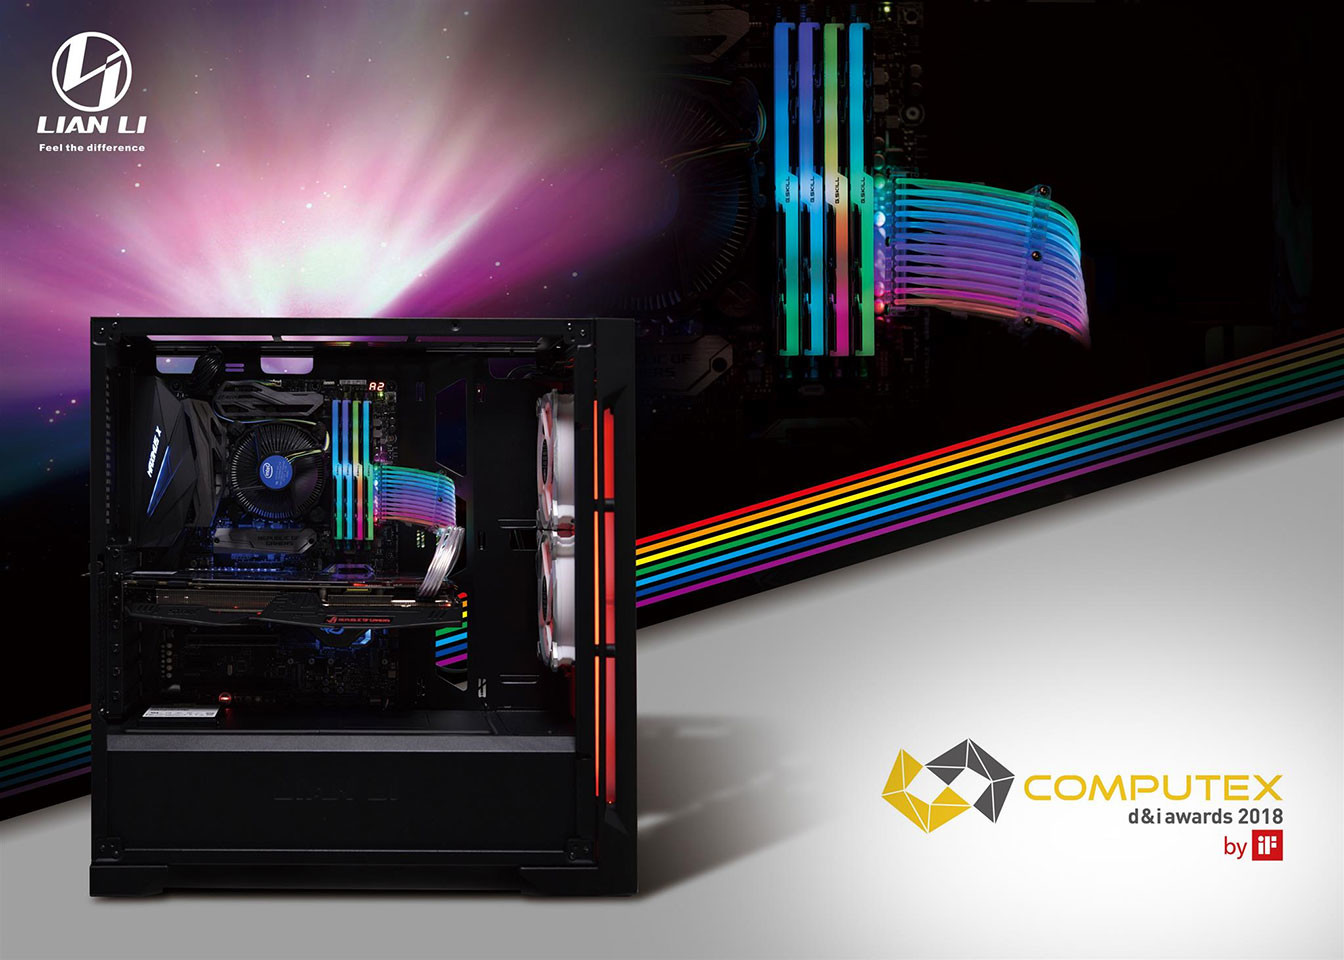 Strimer Plus Series – LIAN LI is a Leading Provider of PC Cases